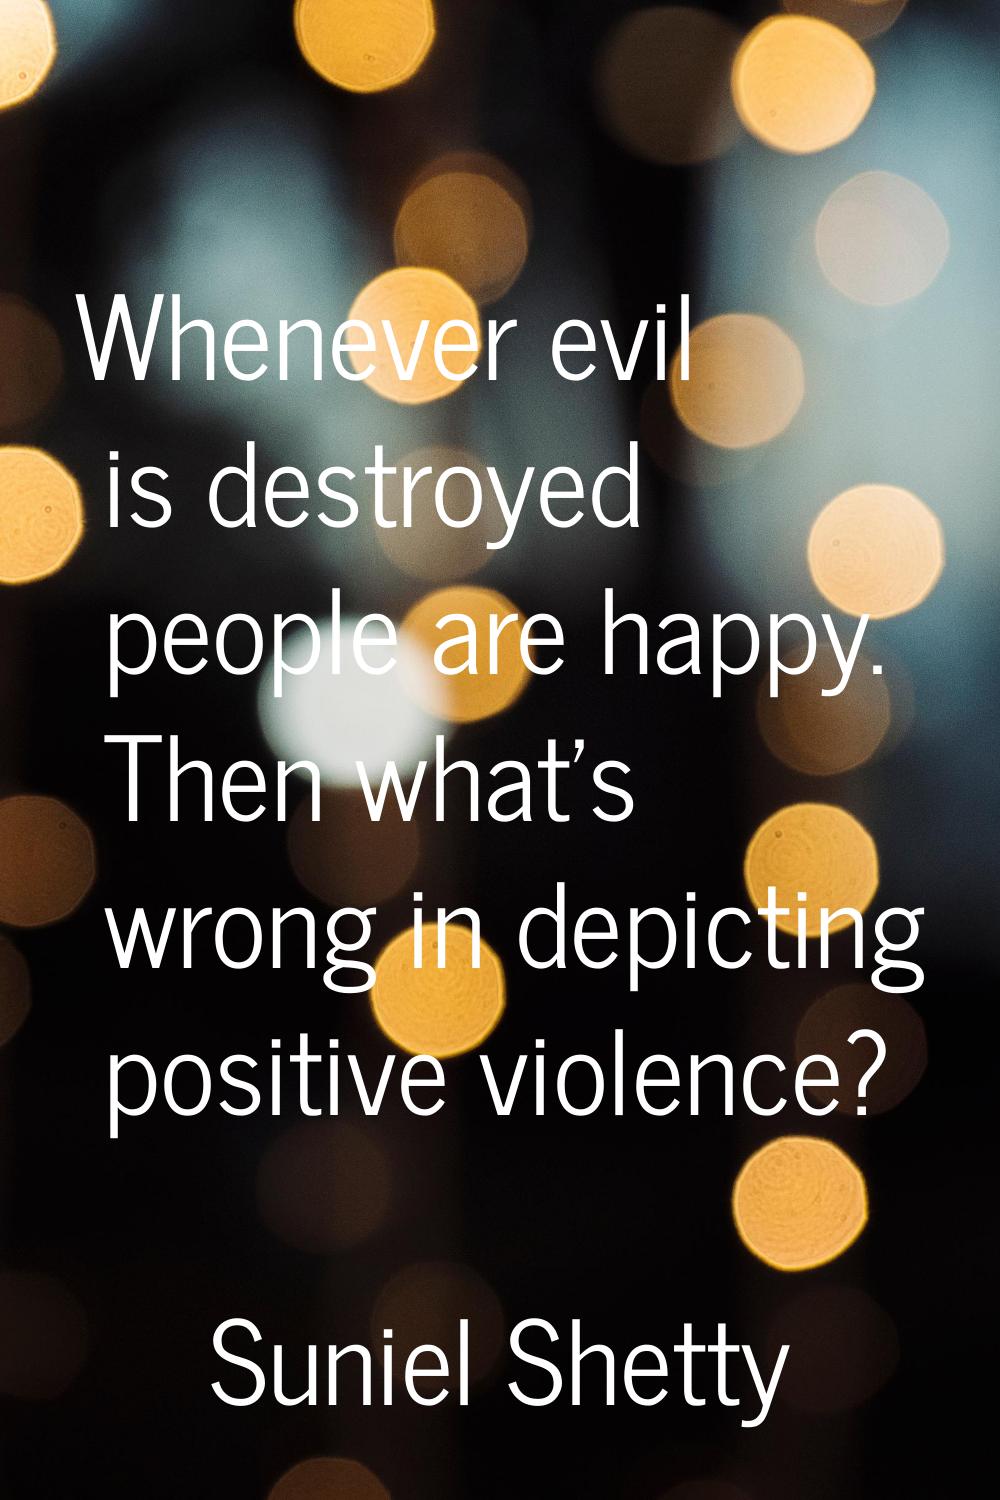 Whenever evil is destroyed people are happy. Then what's wrong in depicting positive violence?